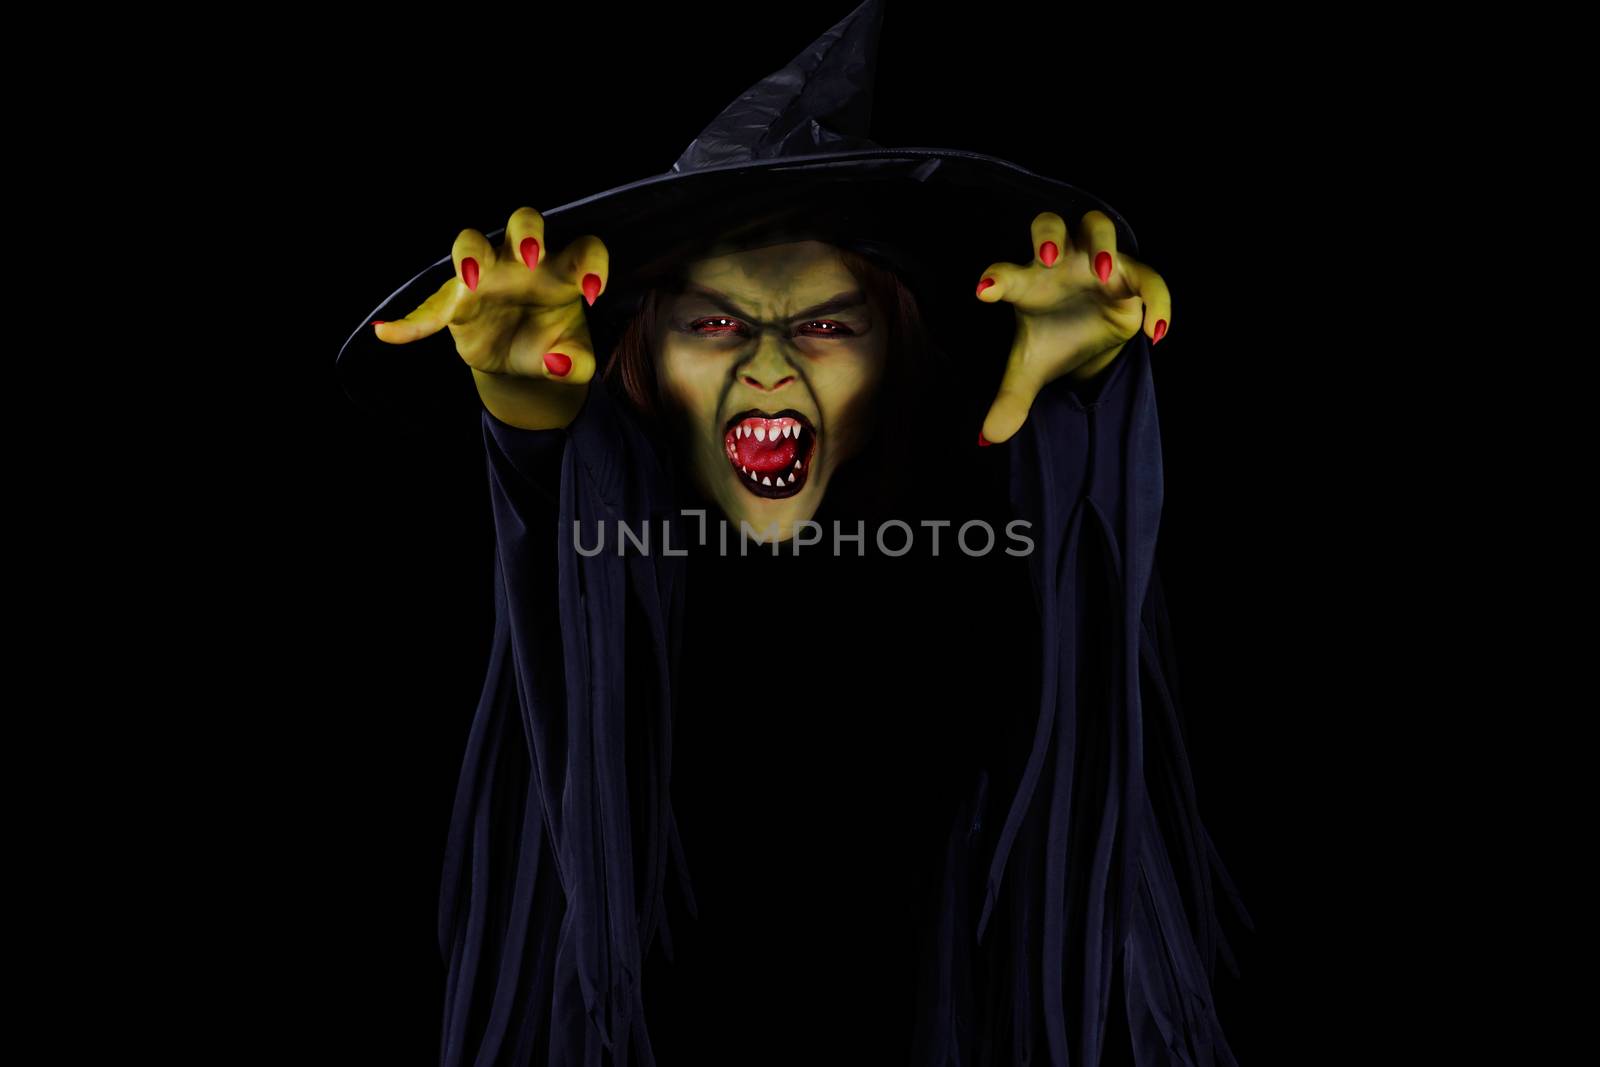 Scary wicked witch trying to catch viewer, Halloween concept